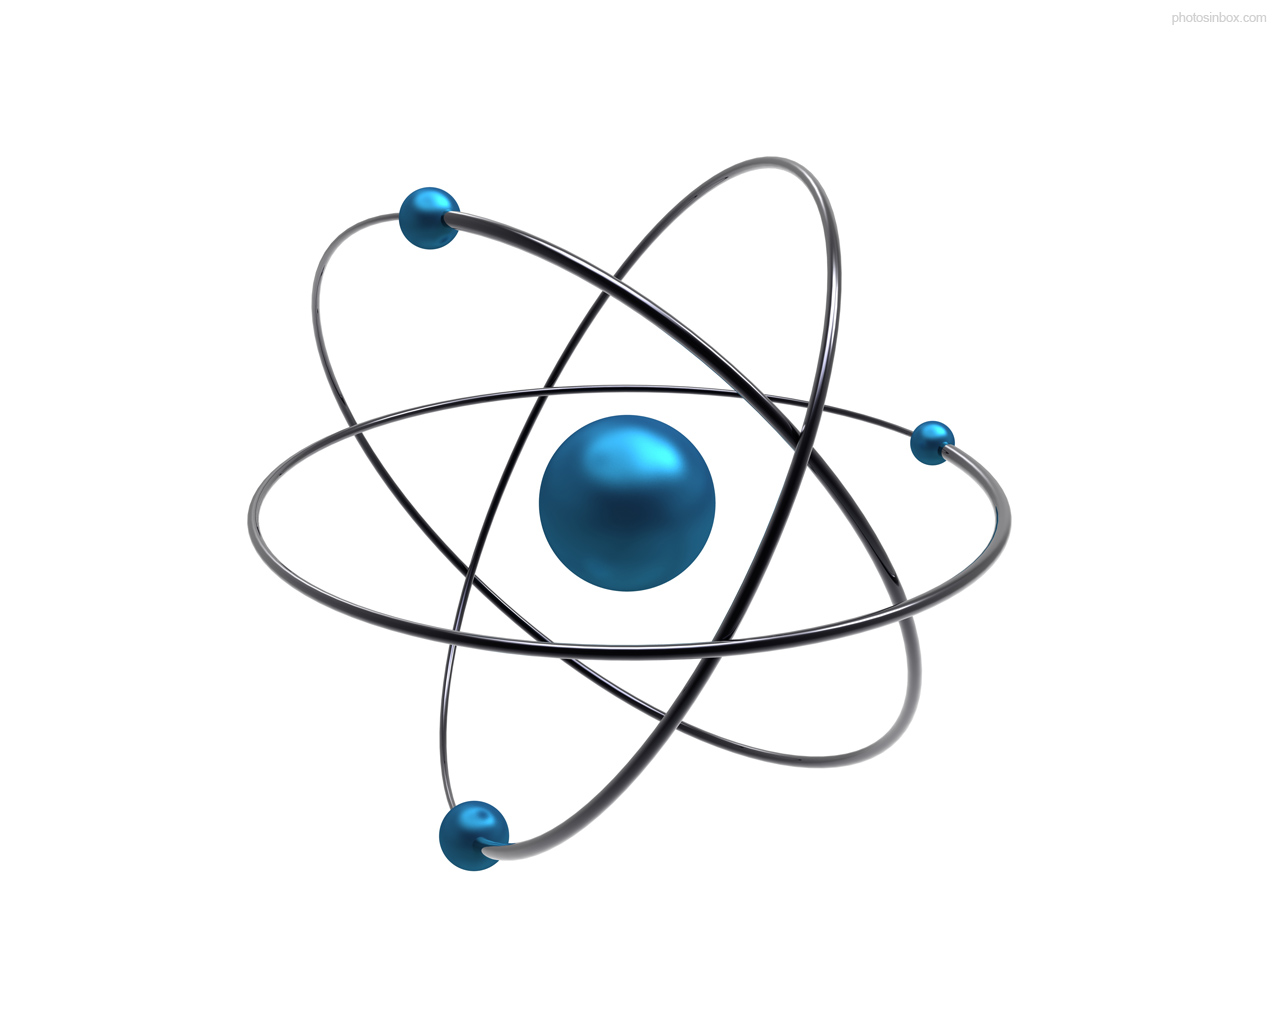 Image result for the atom